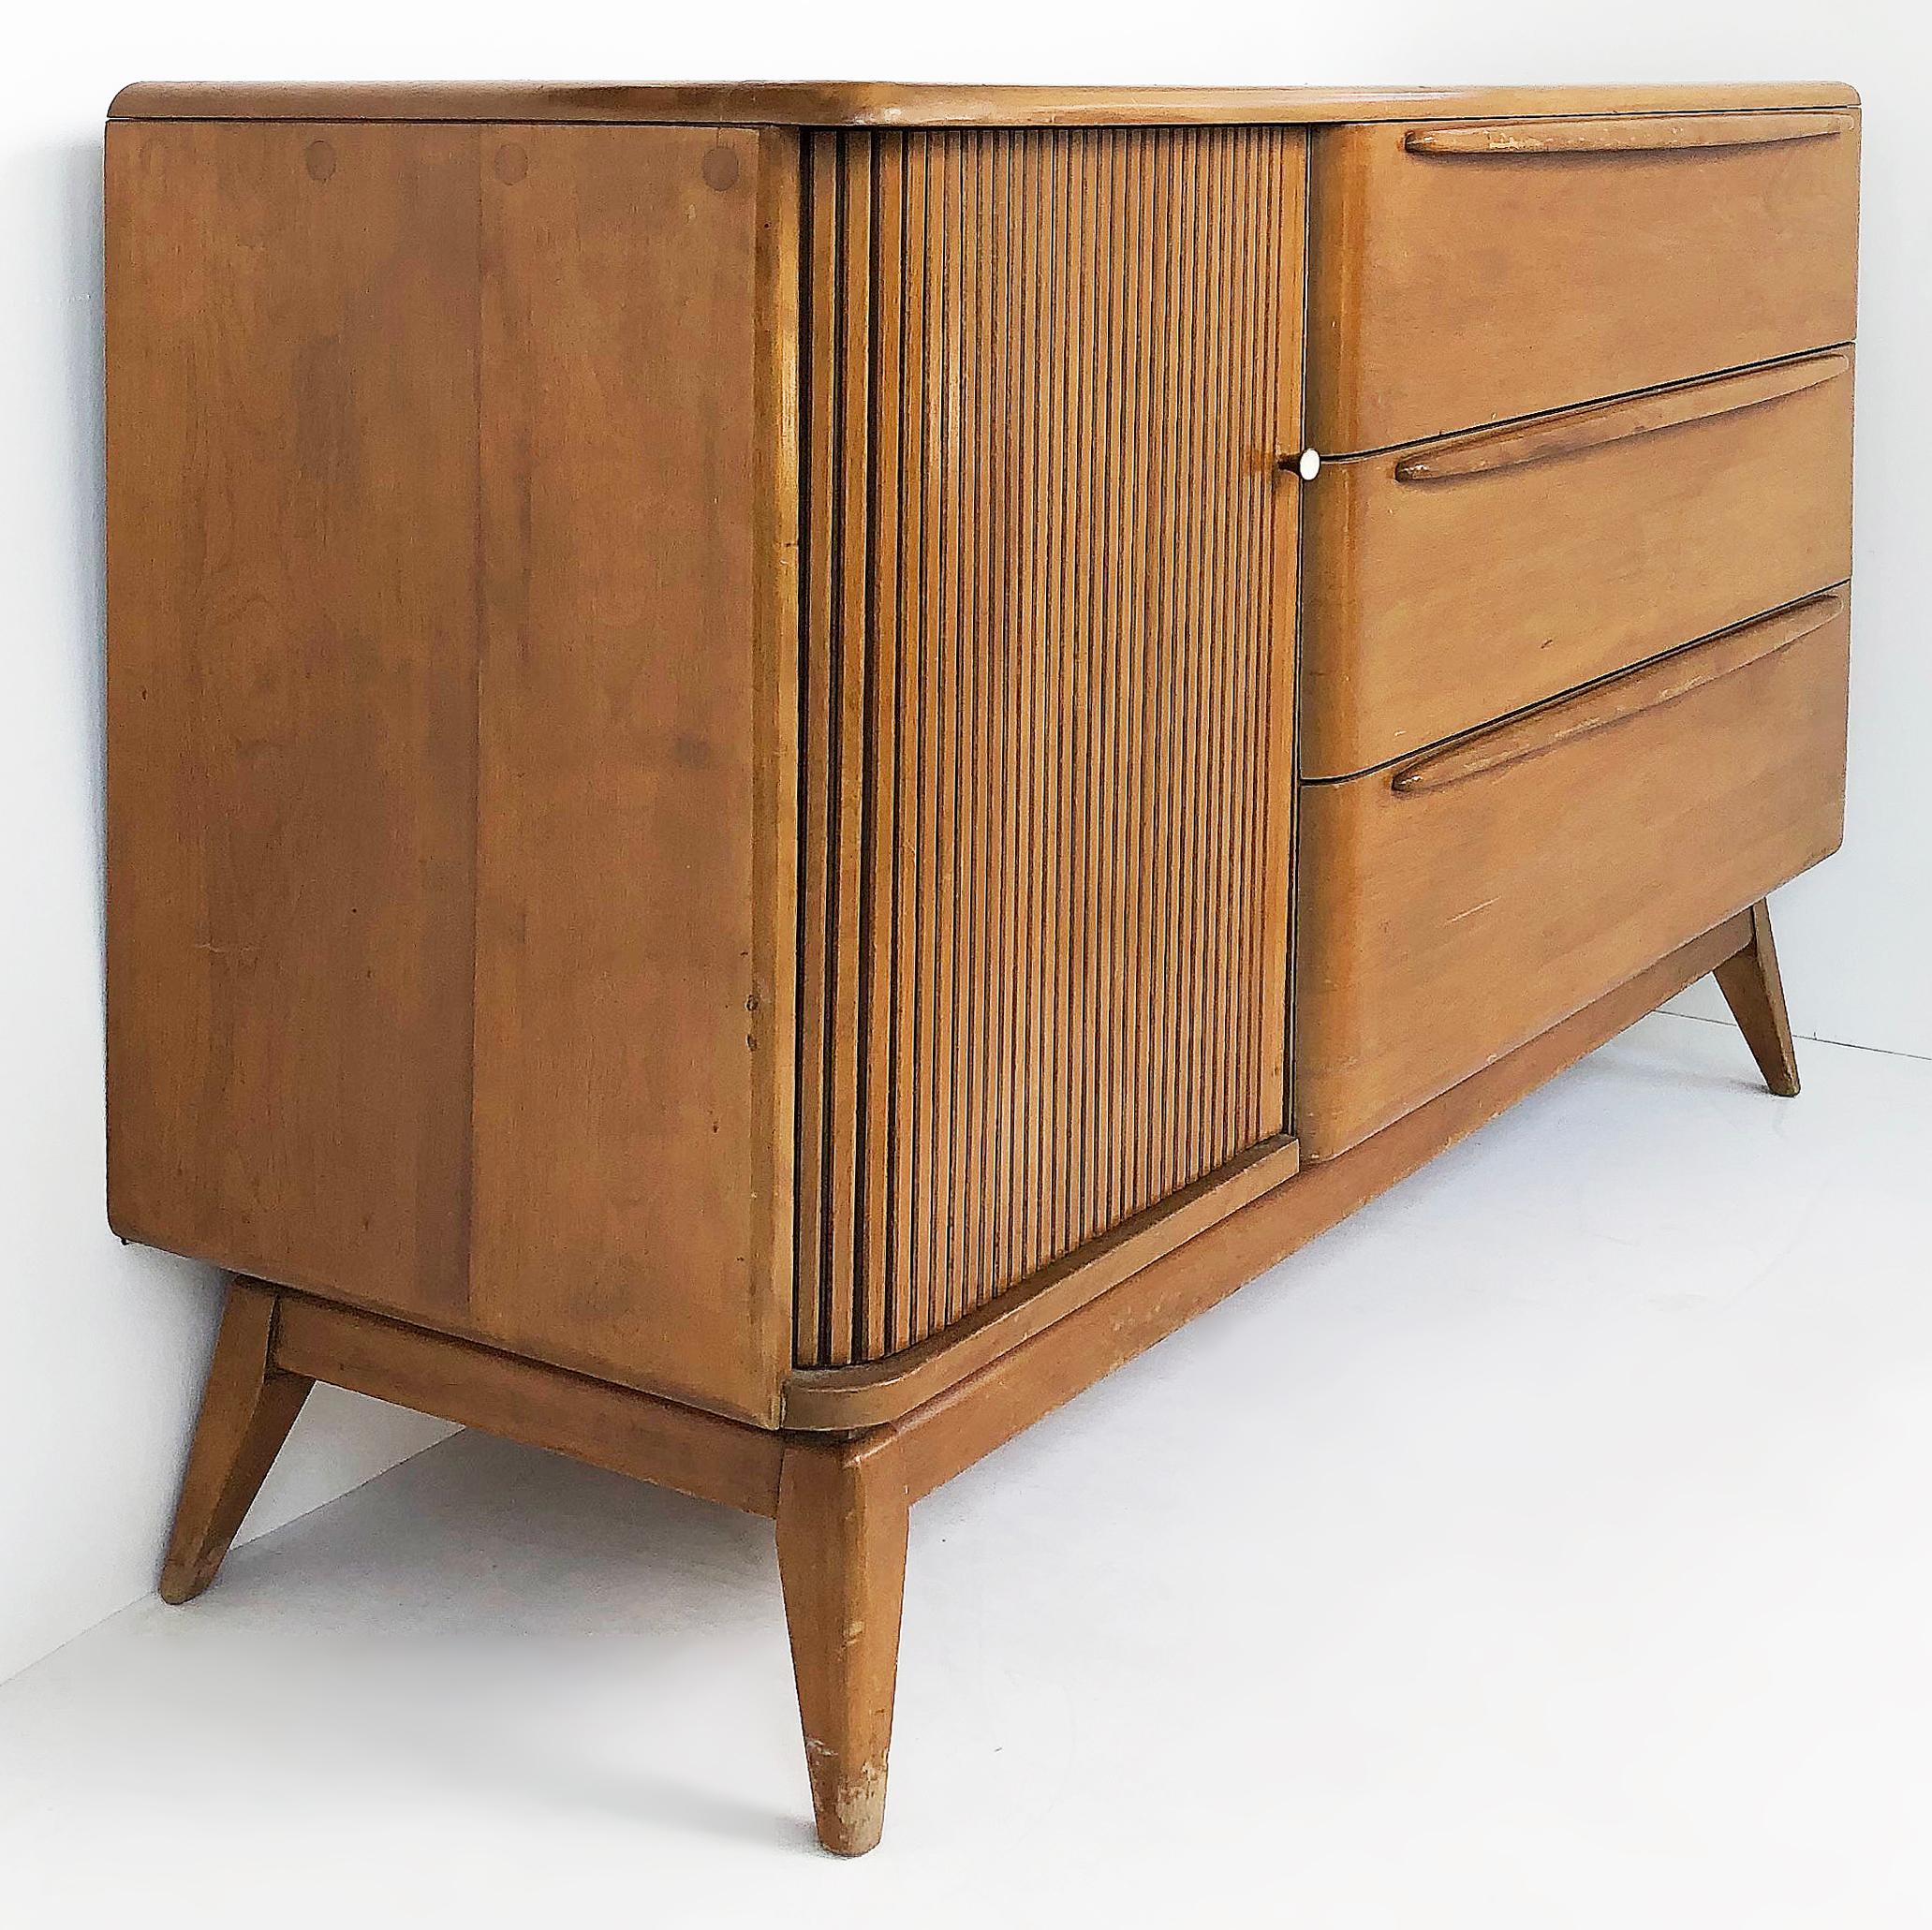 Offered for sale is a Heywood-Wakefield credenza cabinet with a tambour door that opens to reveal open shelves and three drawers to the right.